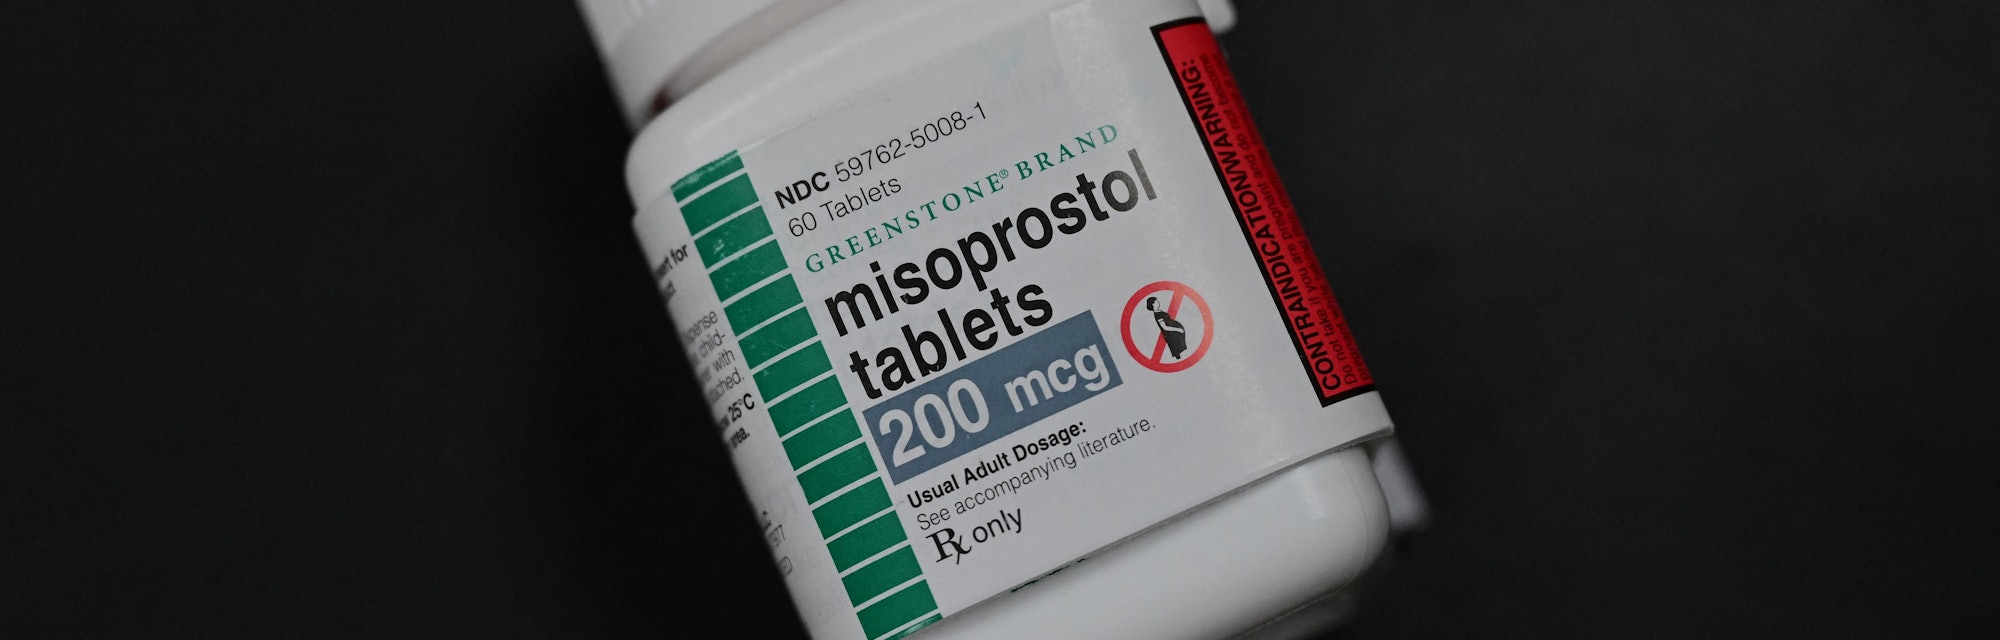 Misoprostol, one of the two drugs used in a medication abortion, is displayed at the Women's Reprodu...